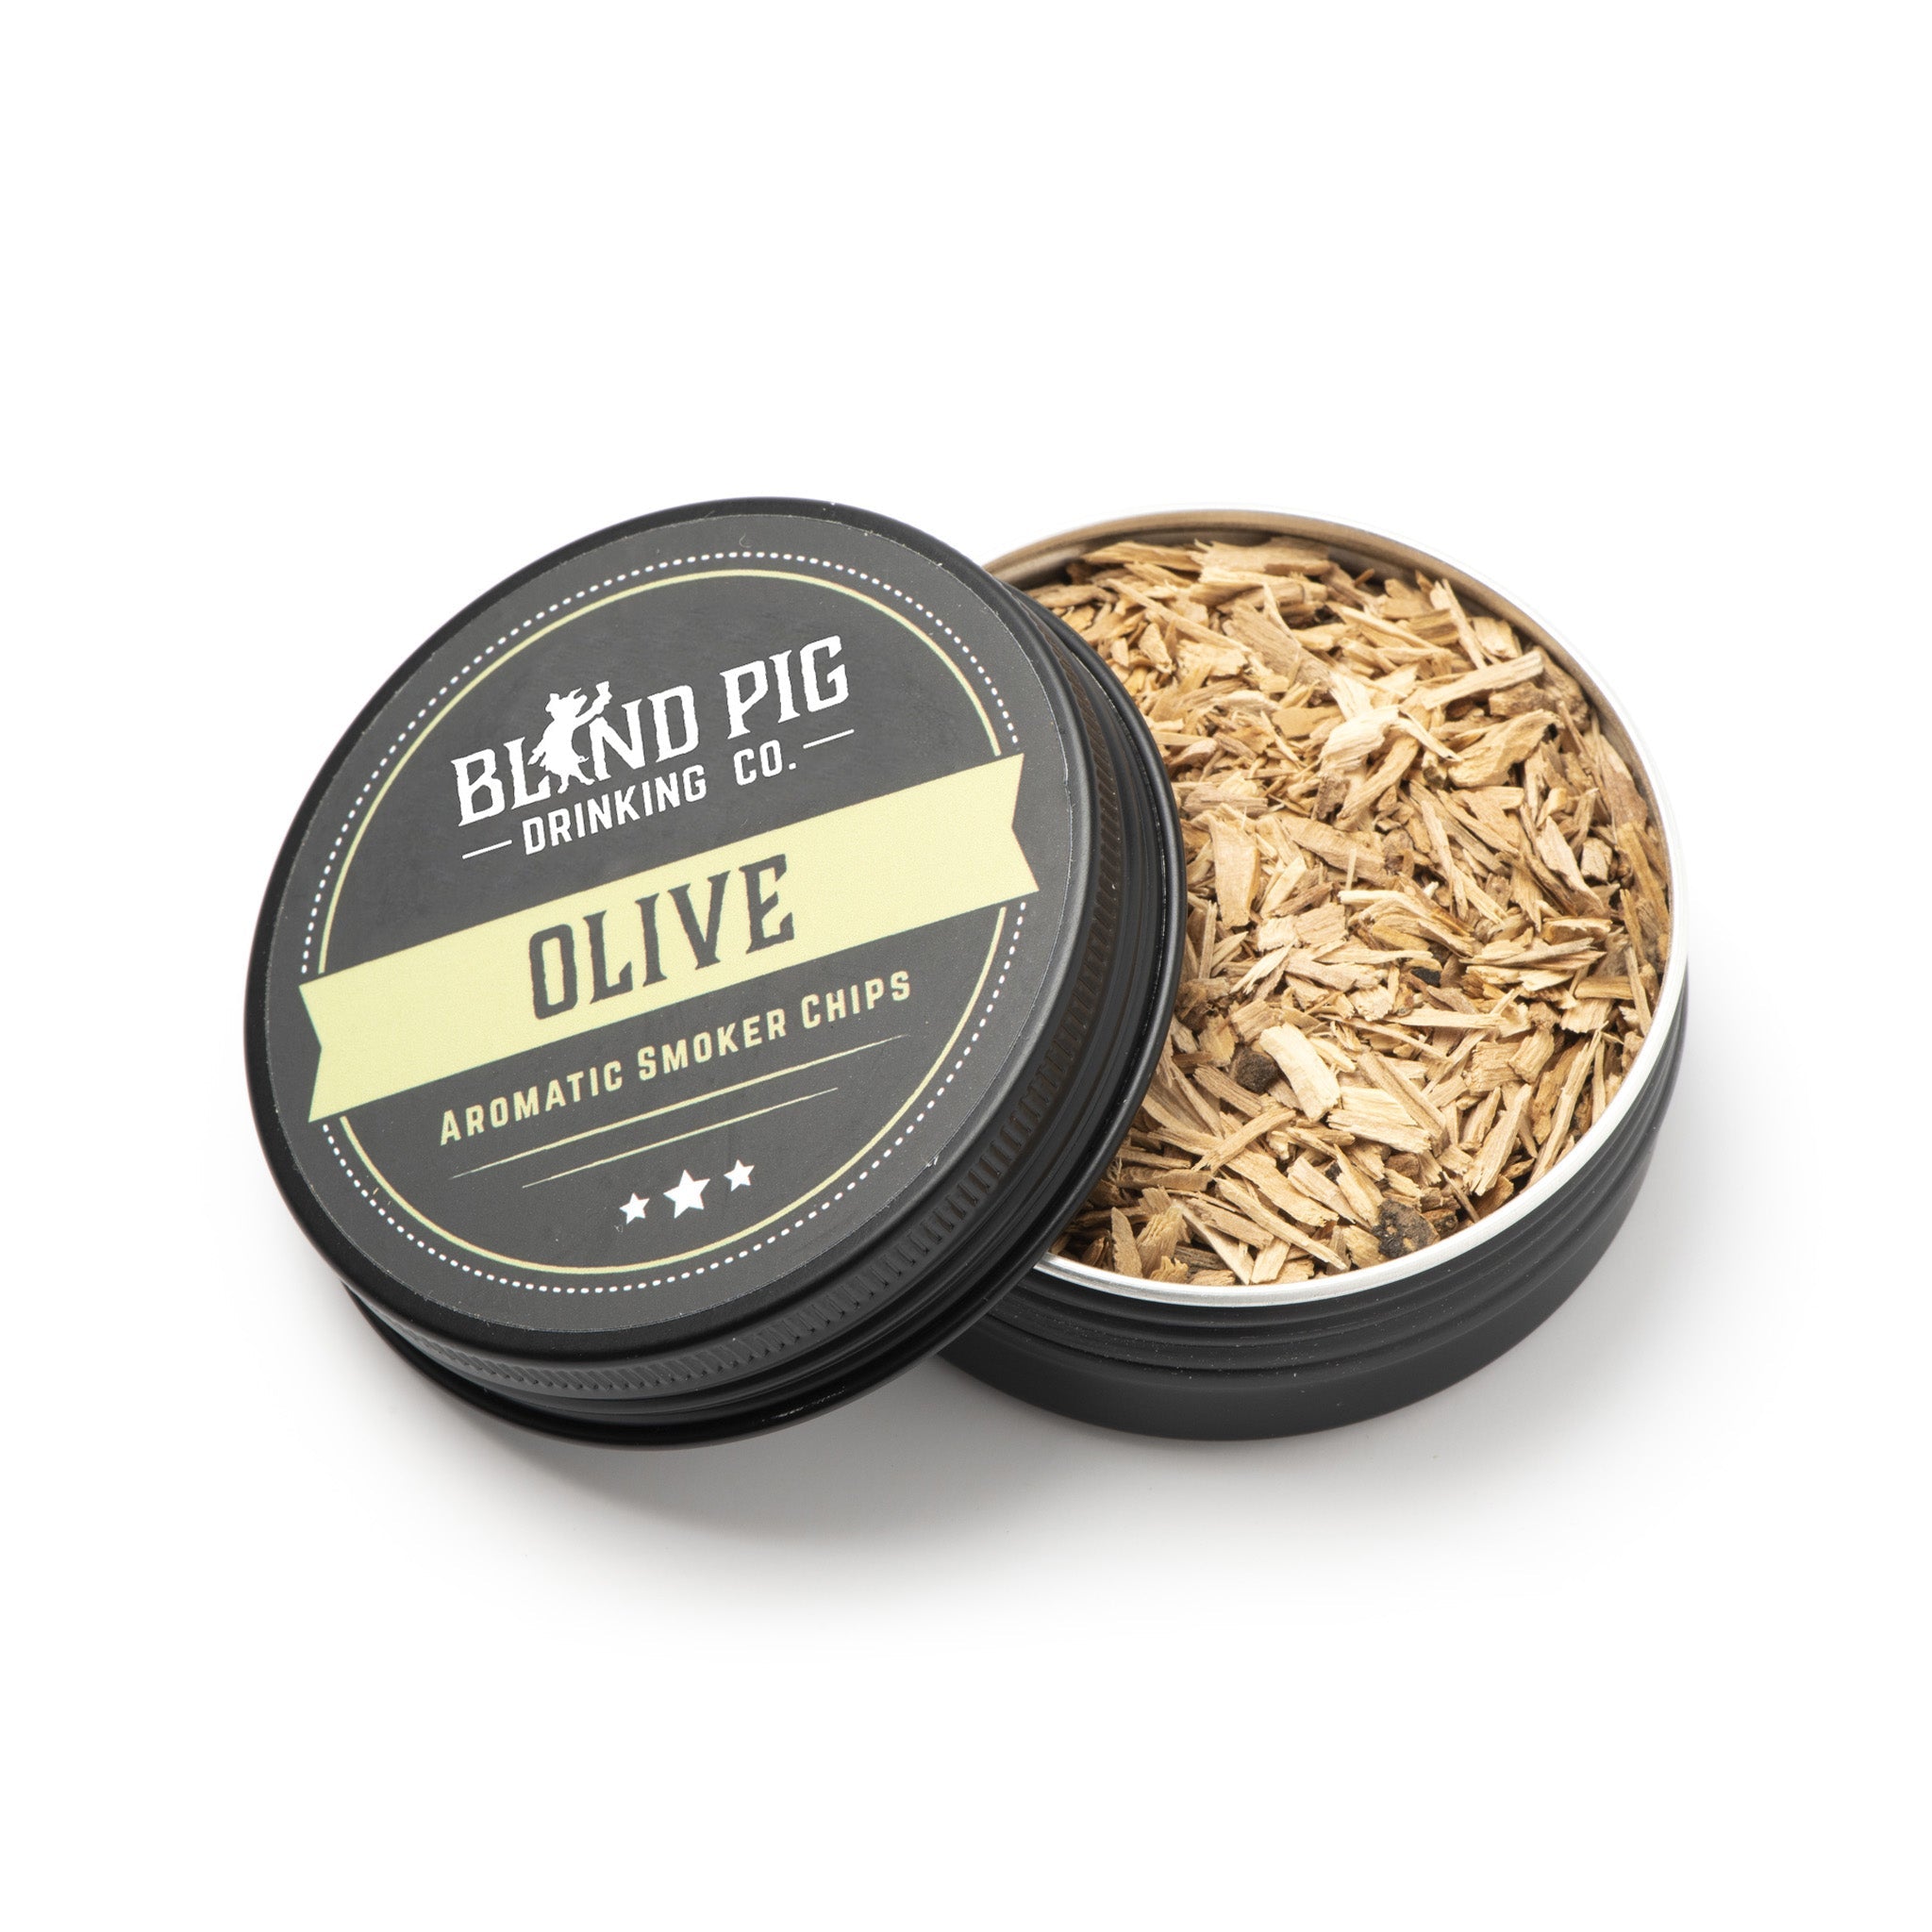 Olive Aromatic Smoker Chips - Blind Pig Drinking Co.